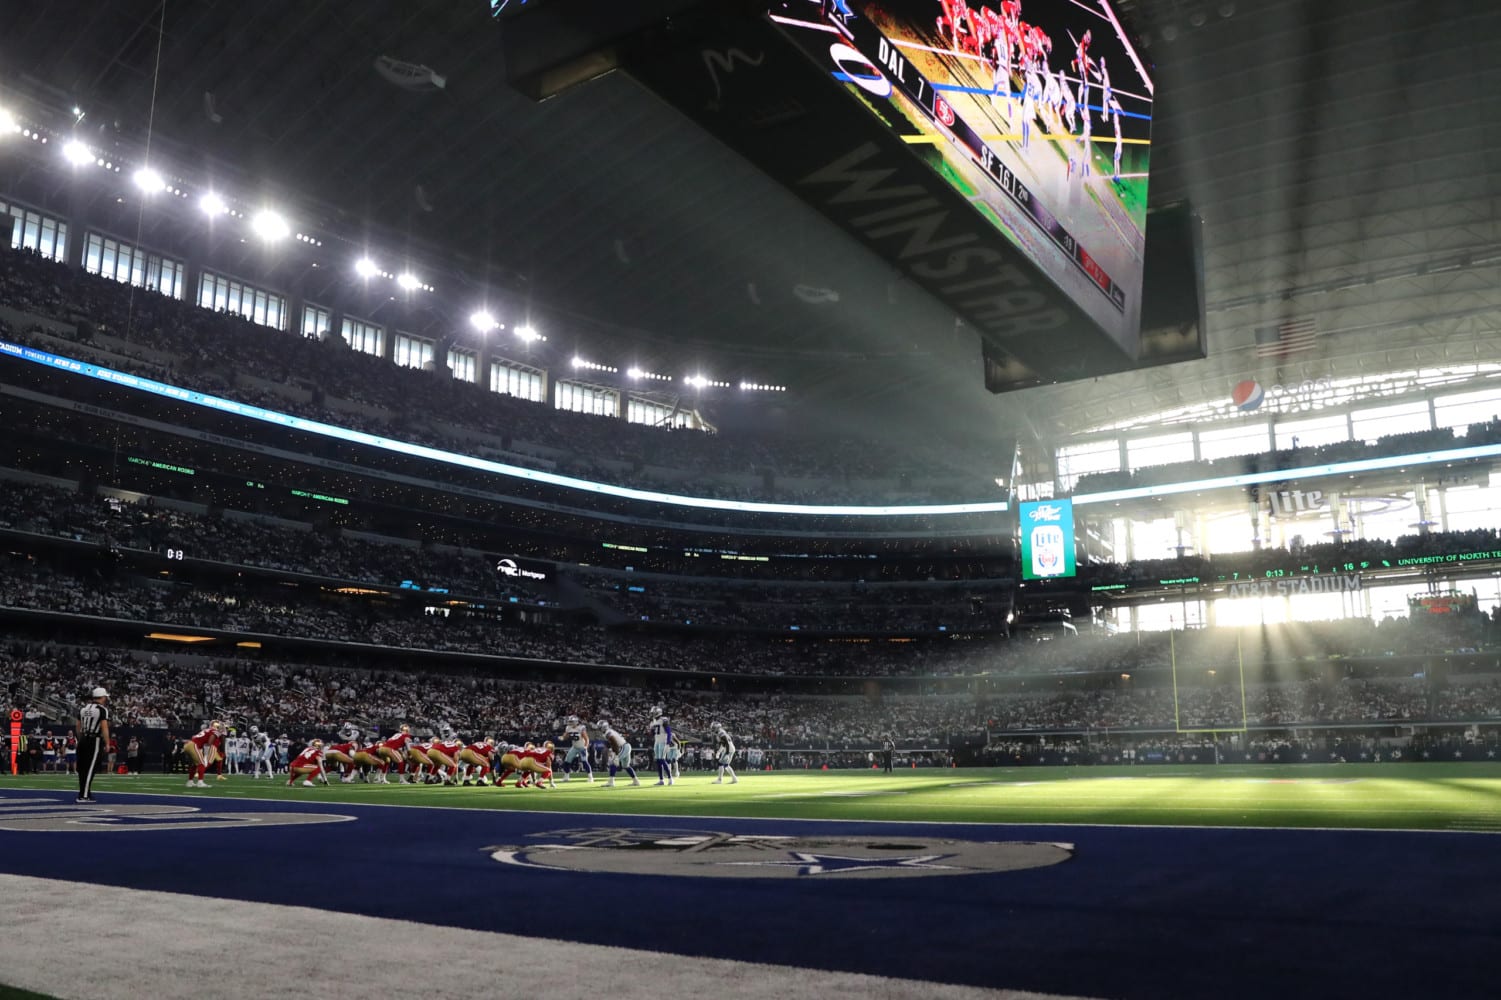 Cowboys Plan $295M in Upgrades for AT&T Stadium